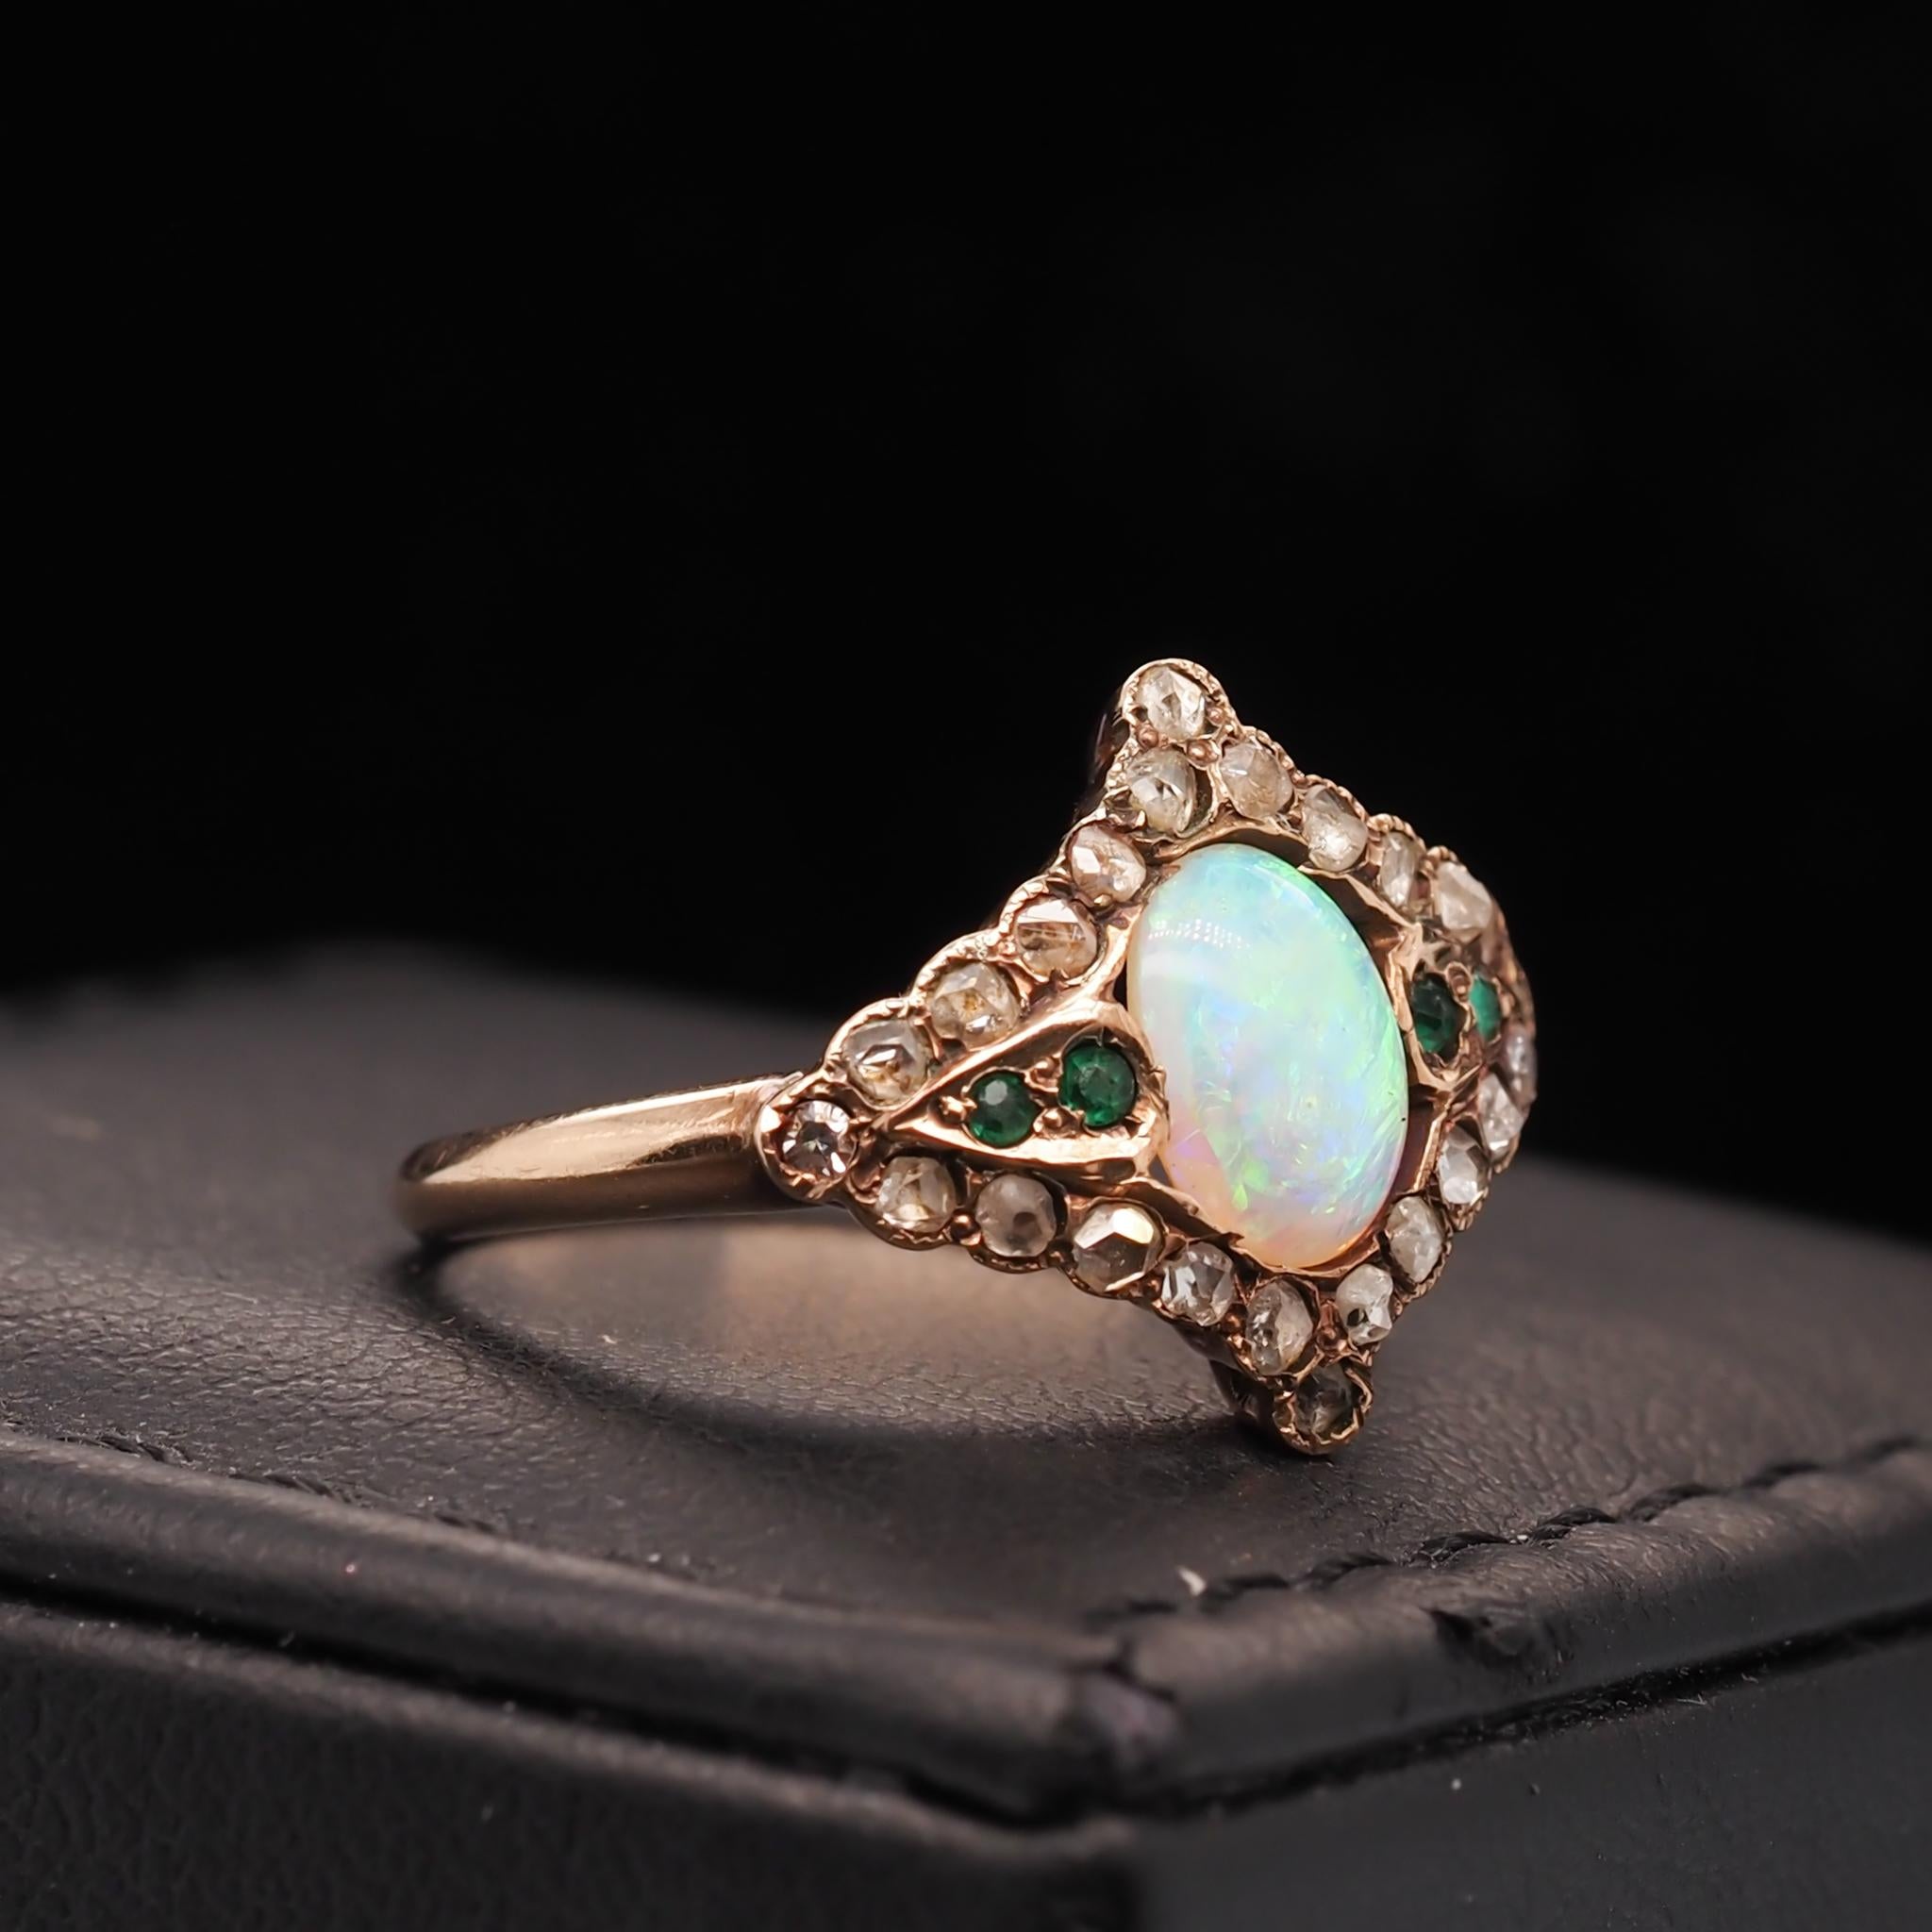 Year: 1900s

Item Details:
Ring Size: 6
Metal Type: 14K Yellow Gold [Hallmarked, and Tested]
Weight: 2.7 grams

Diamond Details: .25ct total weight, rose cut diamond, natural diamonds, I/J Color, VS clarity

Center Stone Details: Australian Opal,